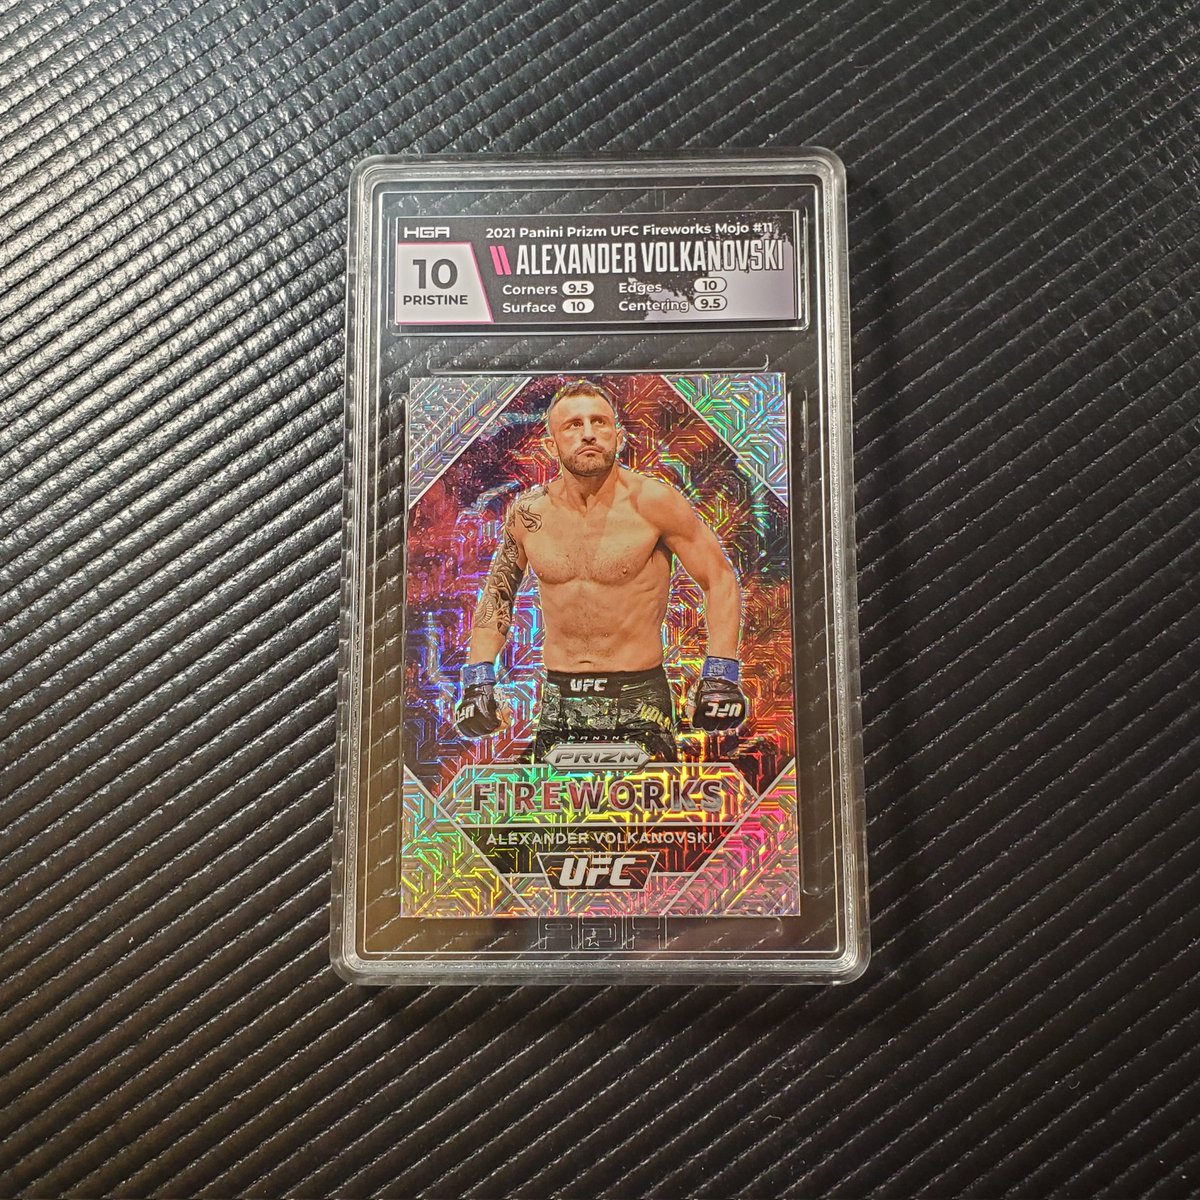 One of my favorite fighters Alexander The Great Volkanovski 
2021 Panini Prizm UFC Fireworks Alexander Volkanovski Mojo 16/25

#alexandervolkanovski #thegreat #ufctradingcards #ufccards #ufc #mma #collectibles #sportscards #tradingcards #prizm #prizmufc #panini #paniniamerica